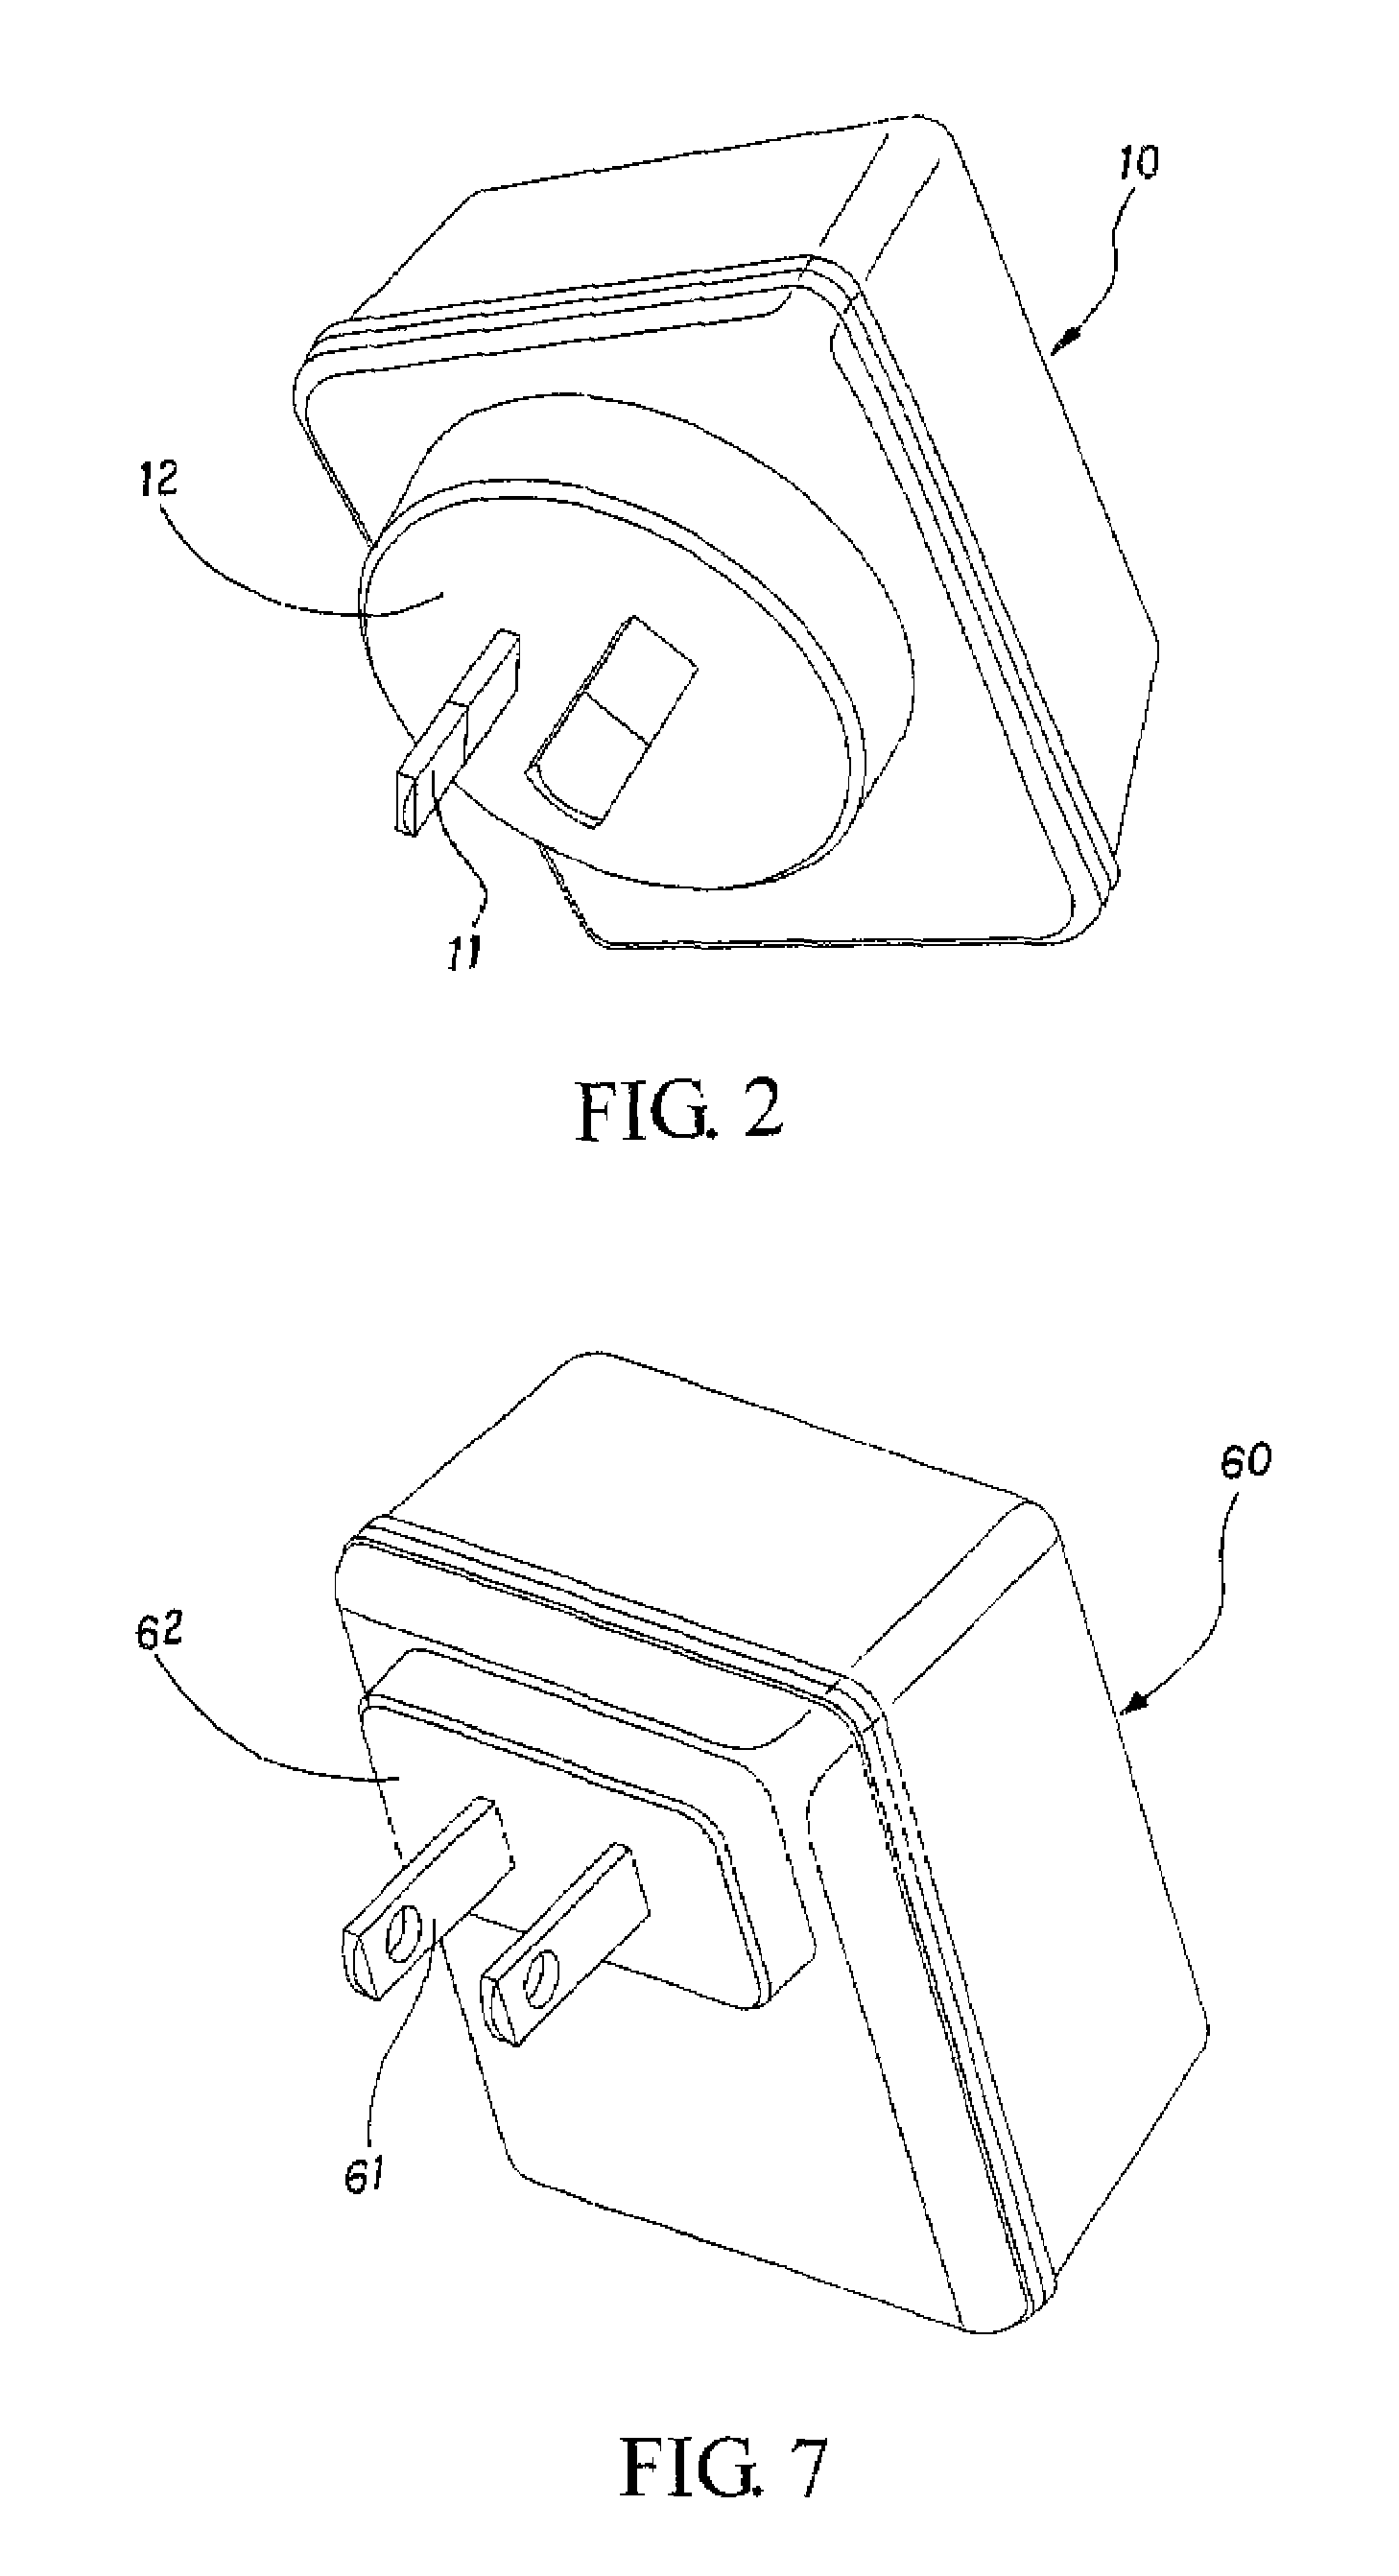 Power plugging device with a function of releasing charges from electric surges